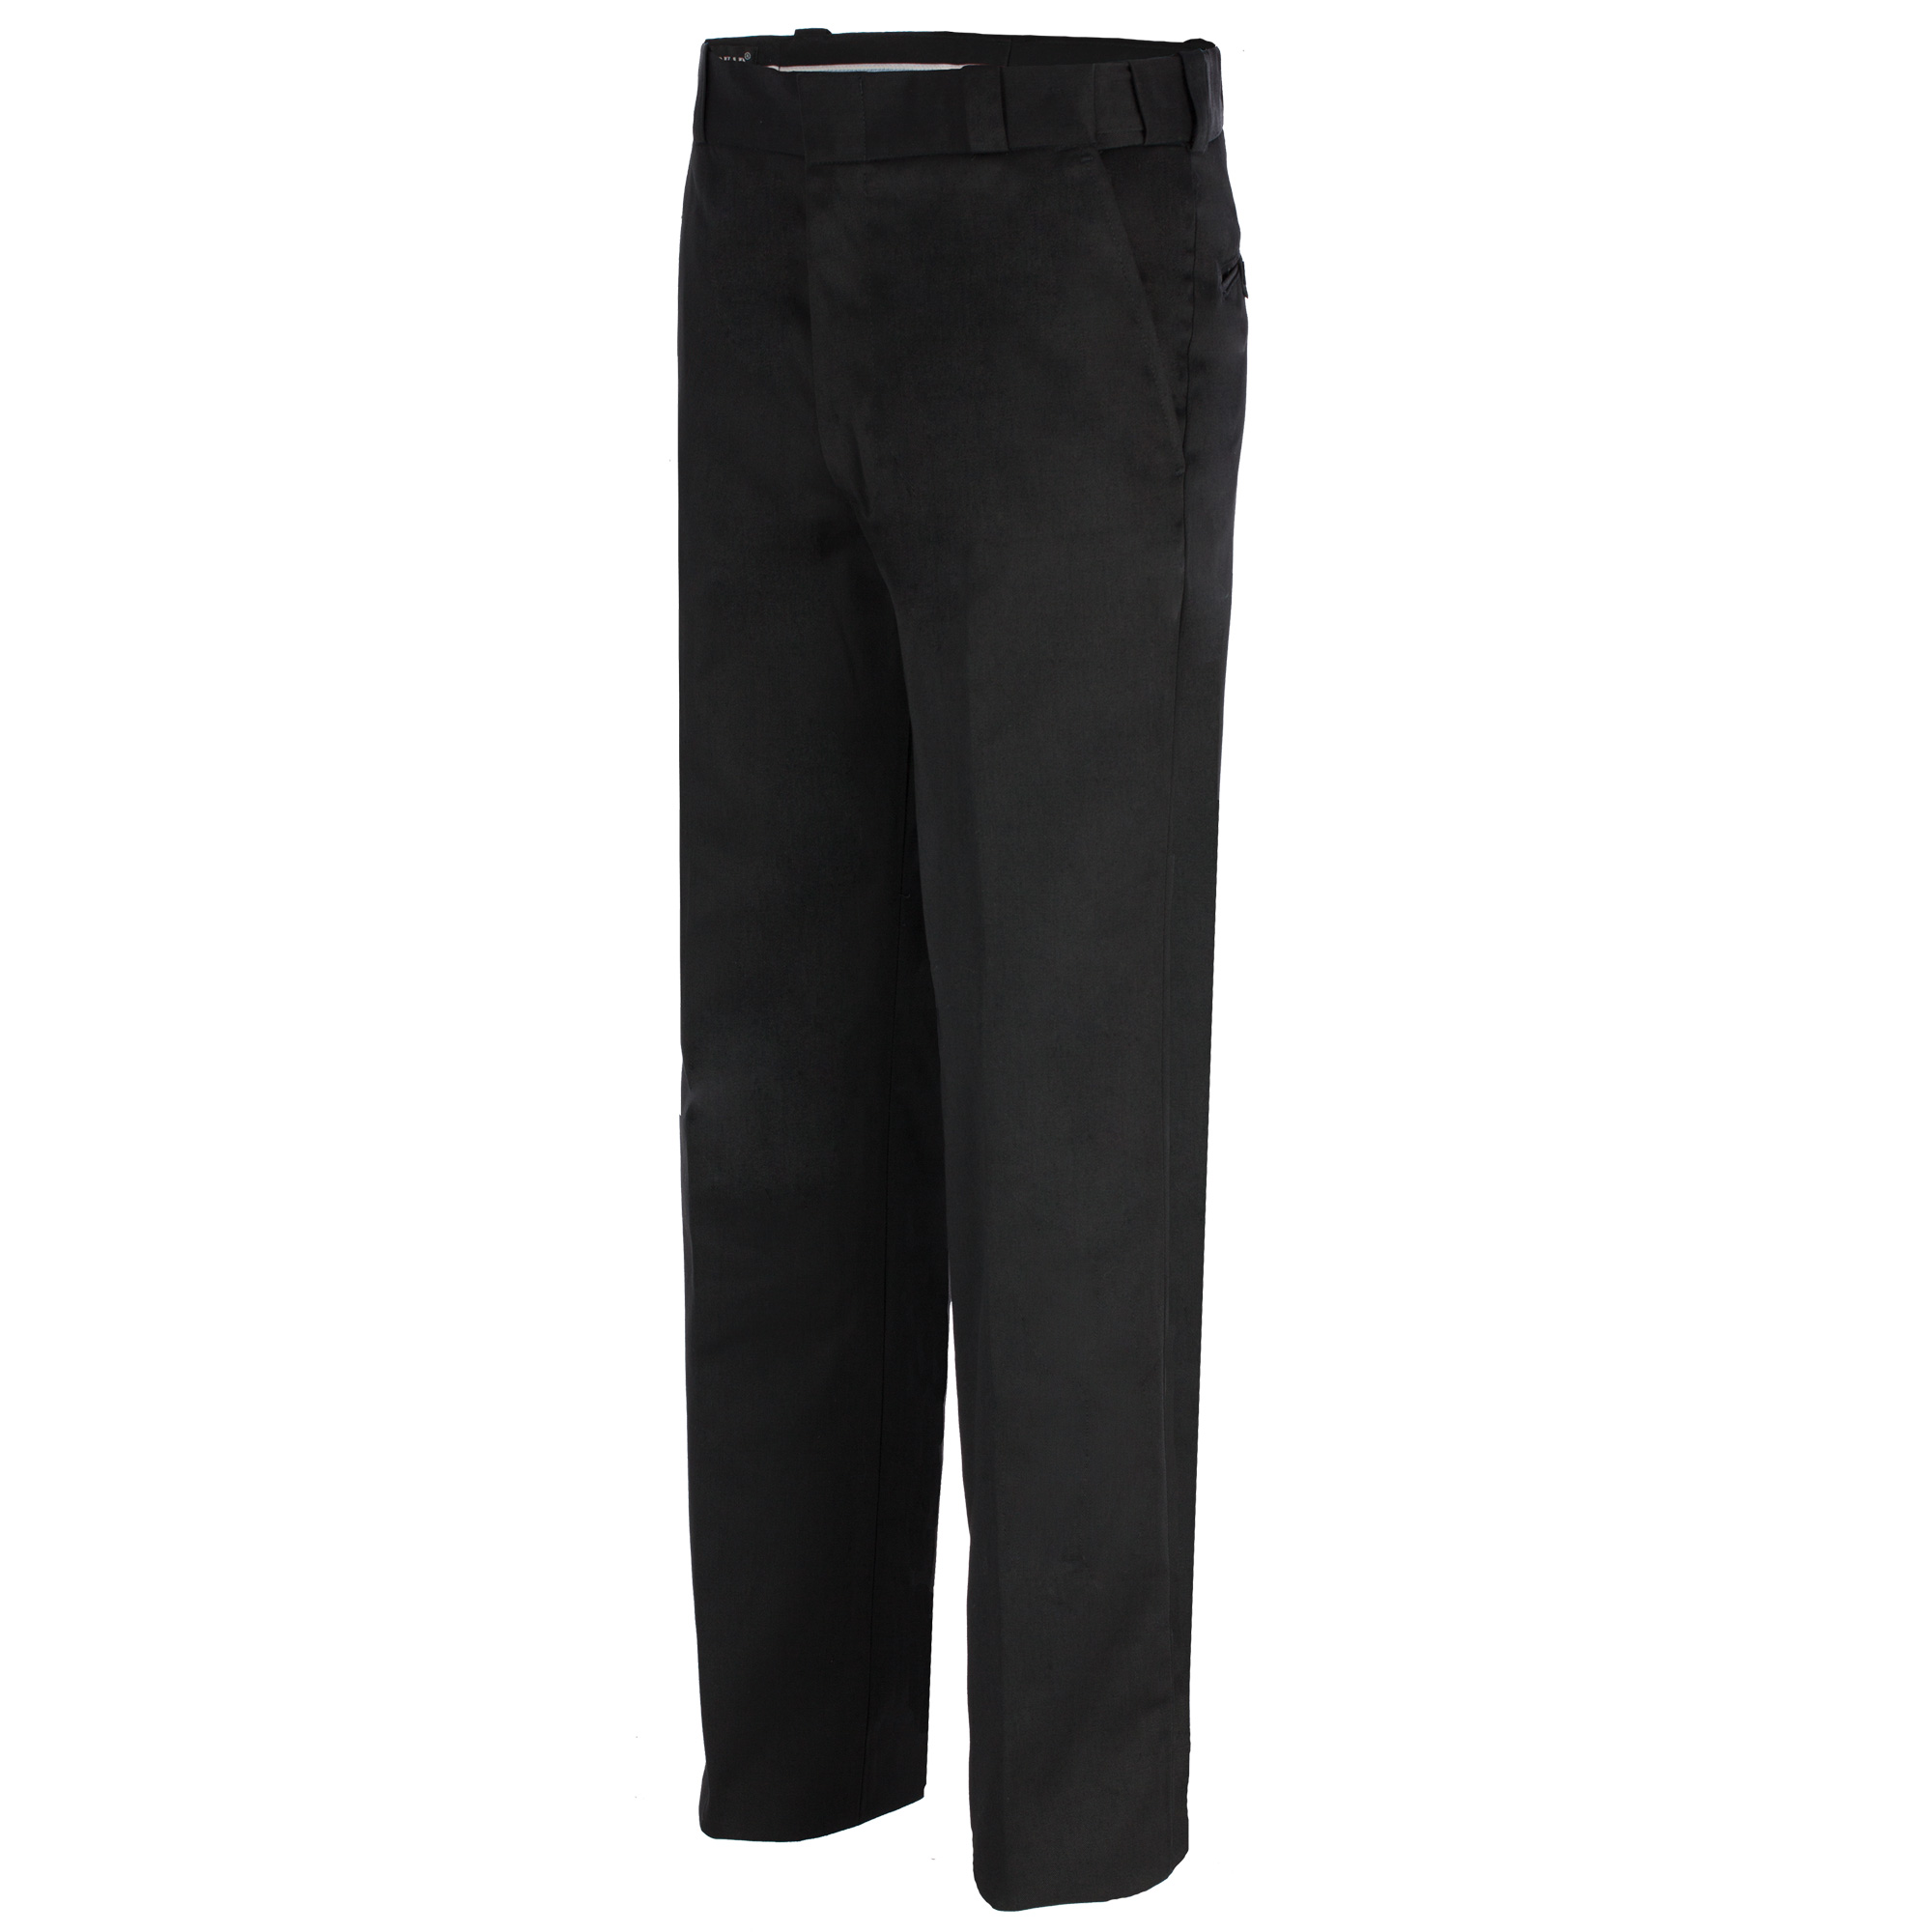 Tact Squad 7012 Polyester/Cotton 4-Pocket Trousers – Tactsquad